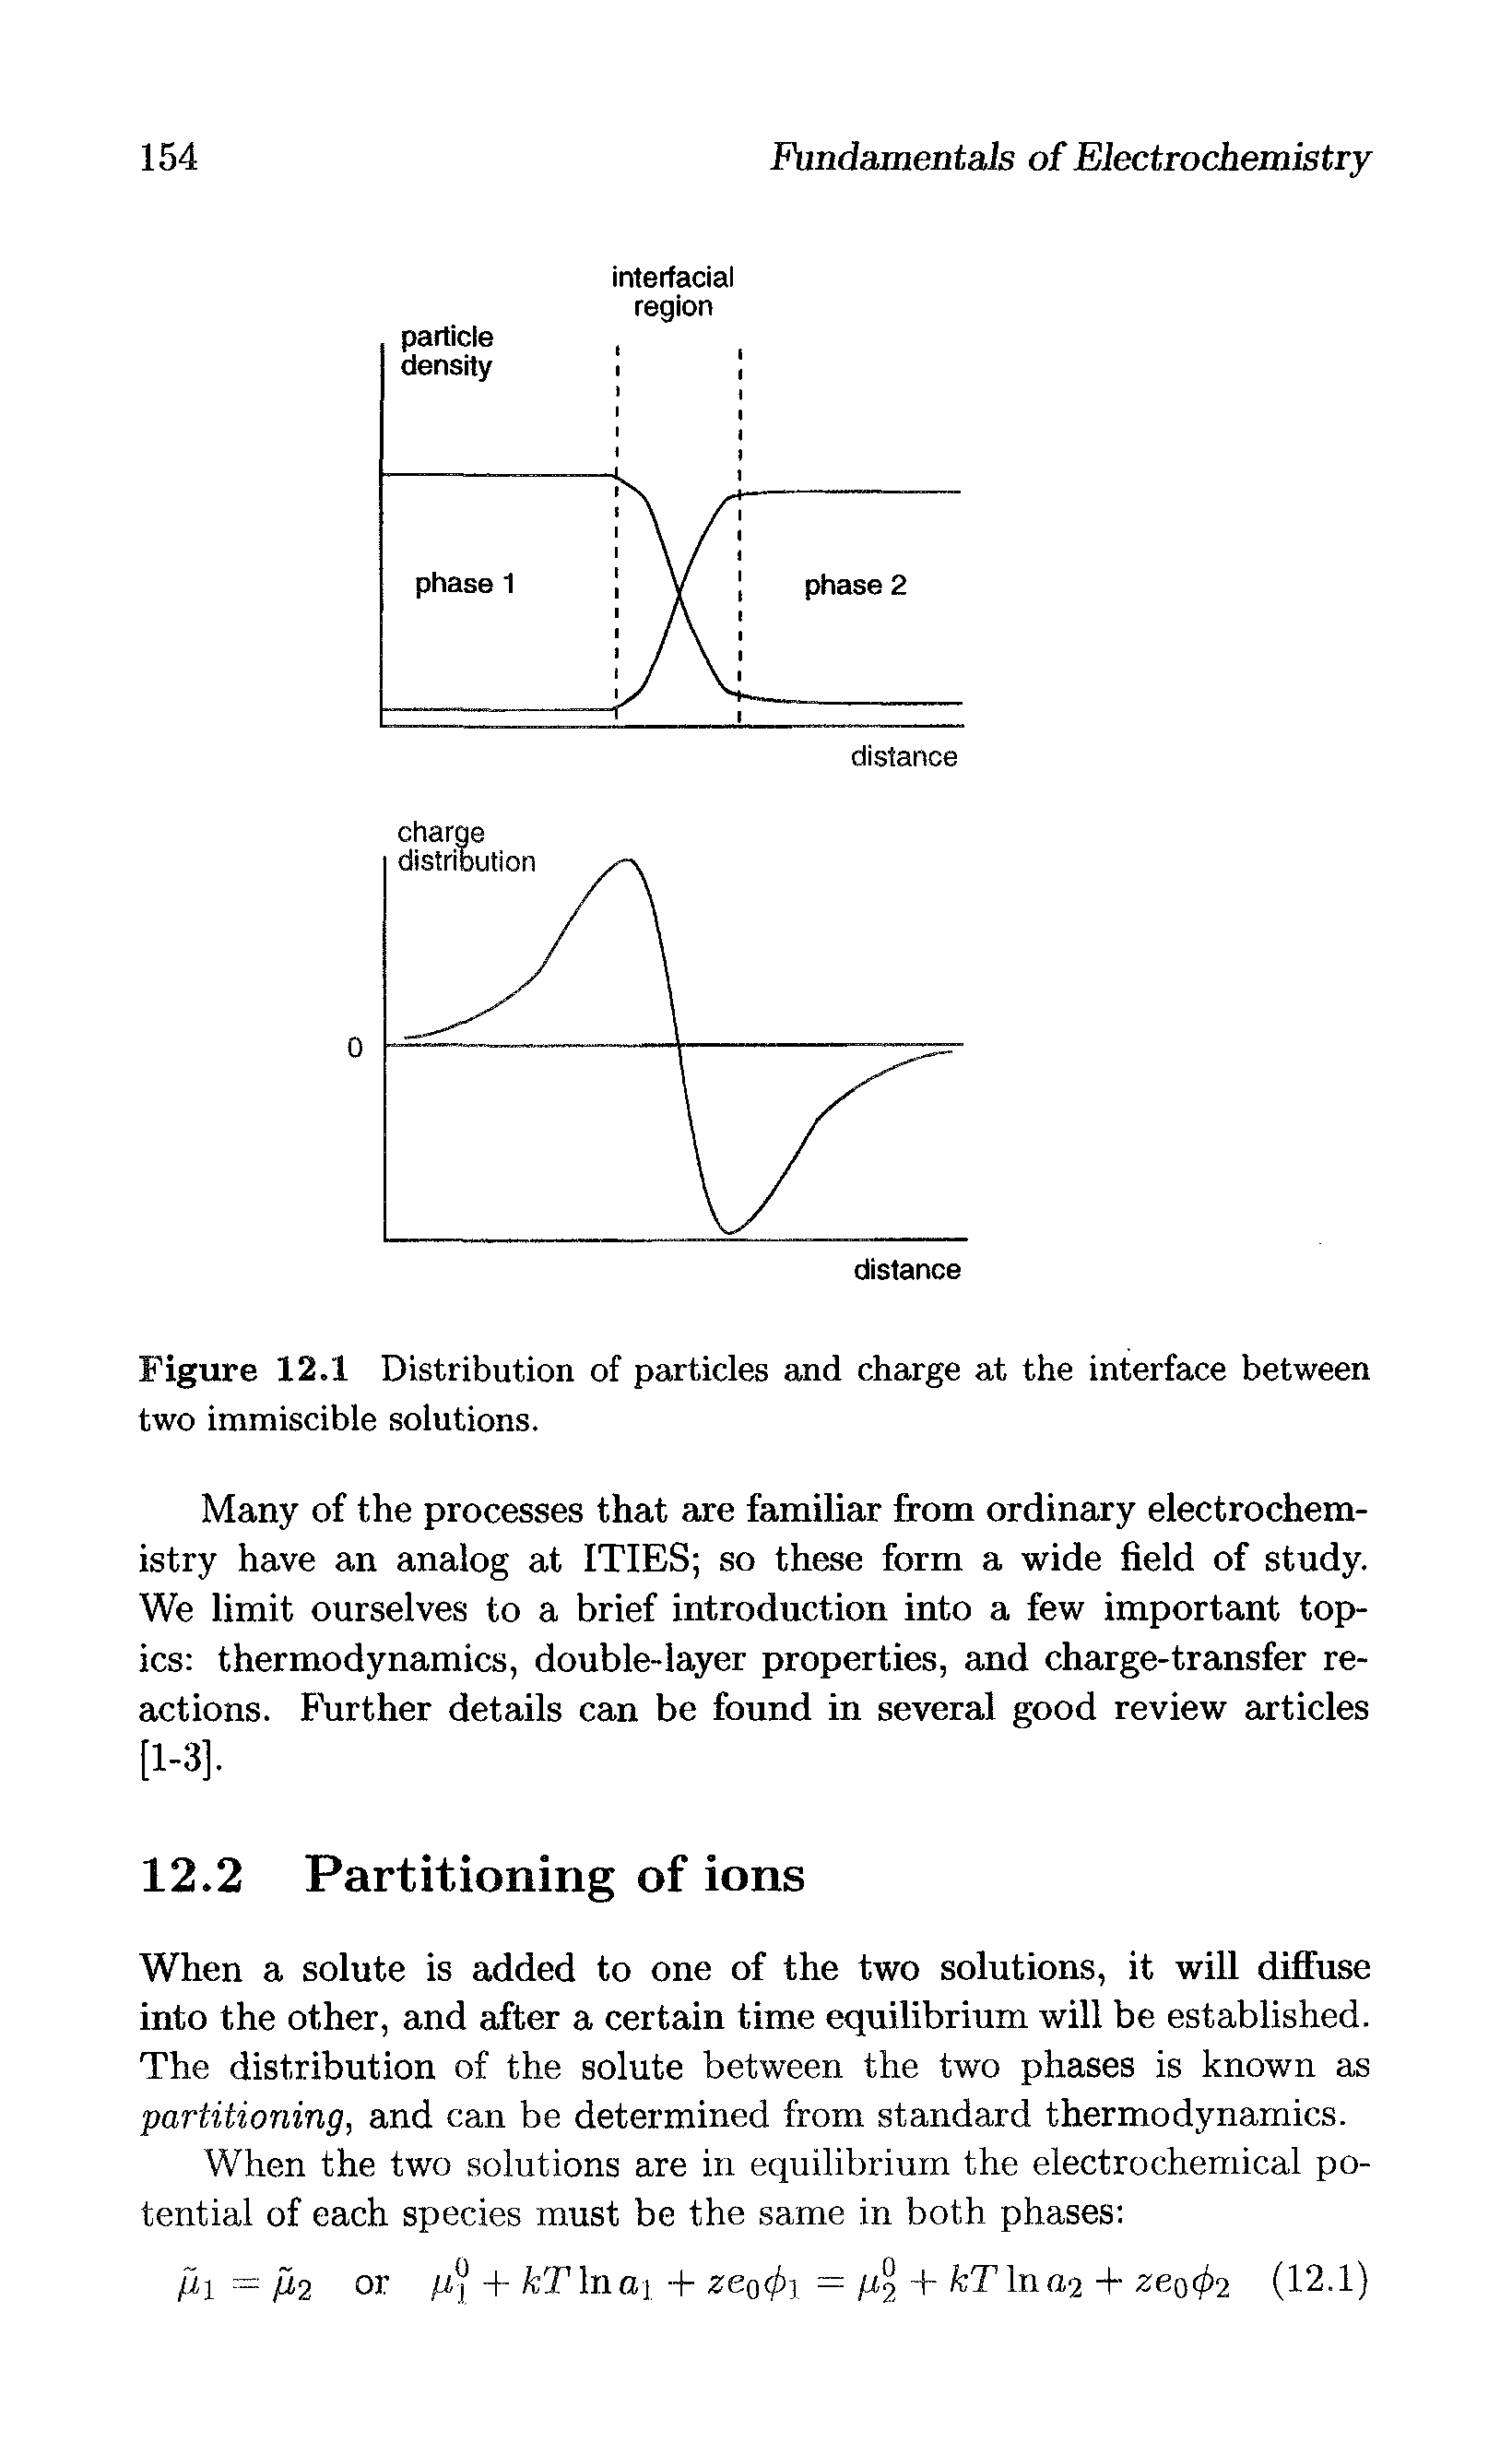 Figure 12.1 Distribution of particles and charge at the interface between two immiscible solutions.